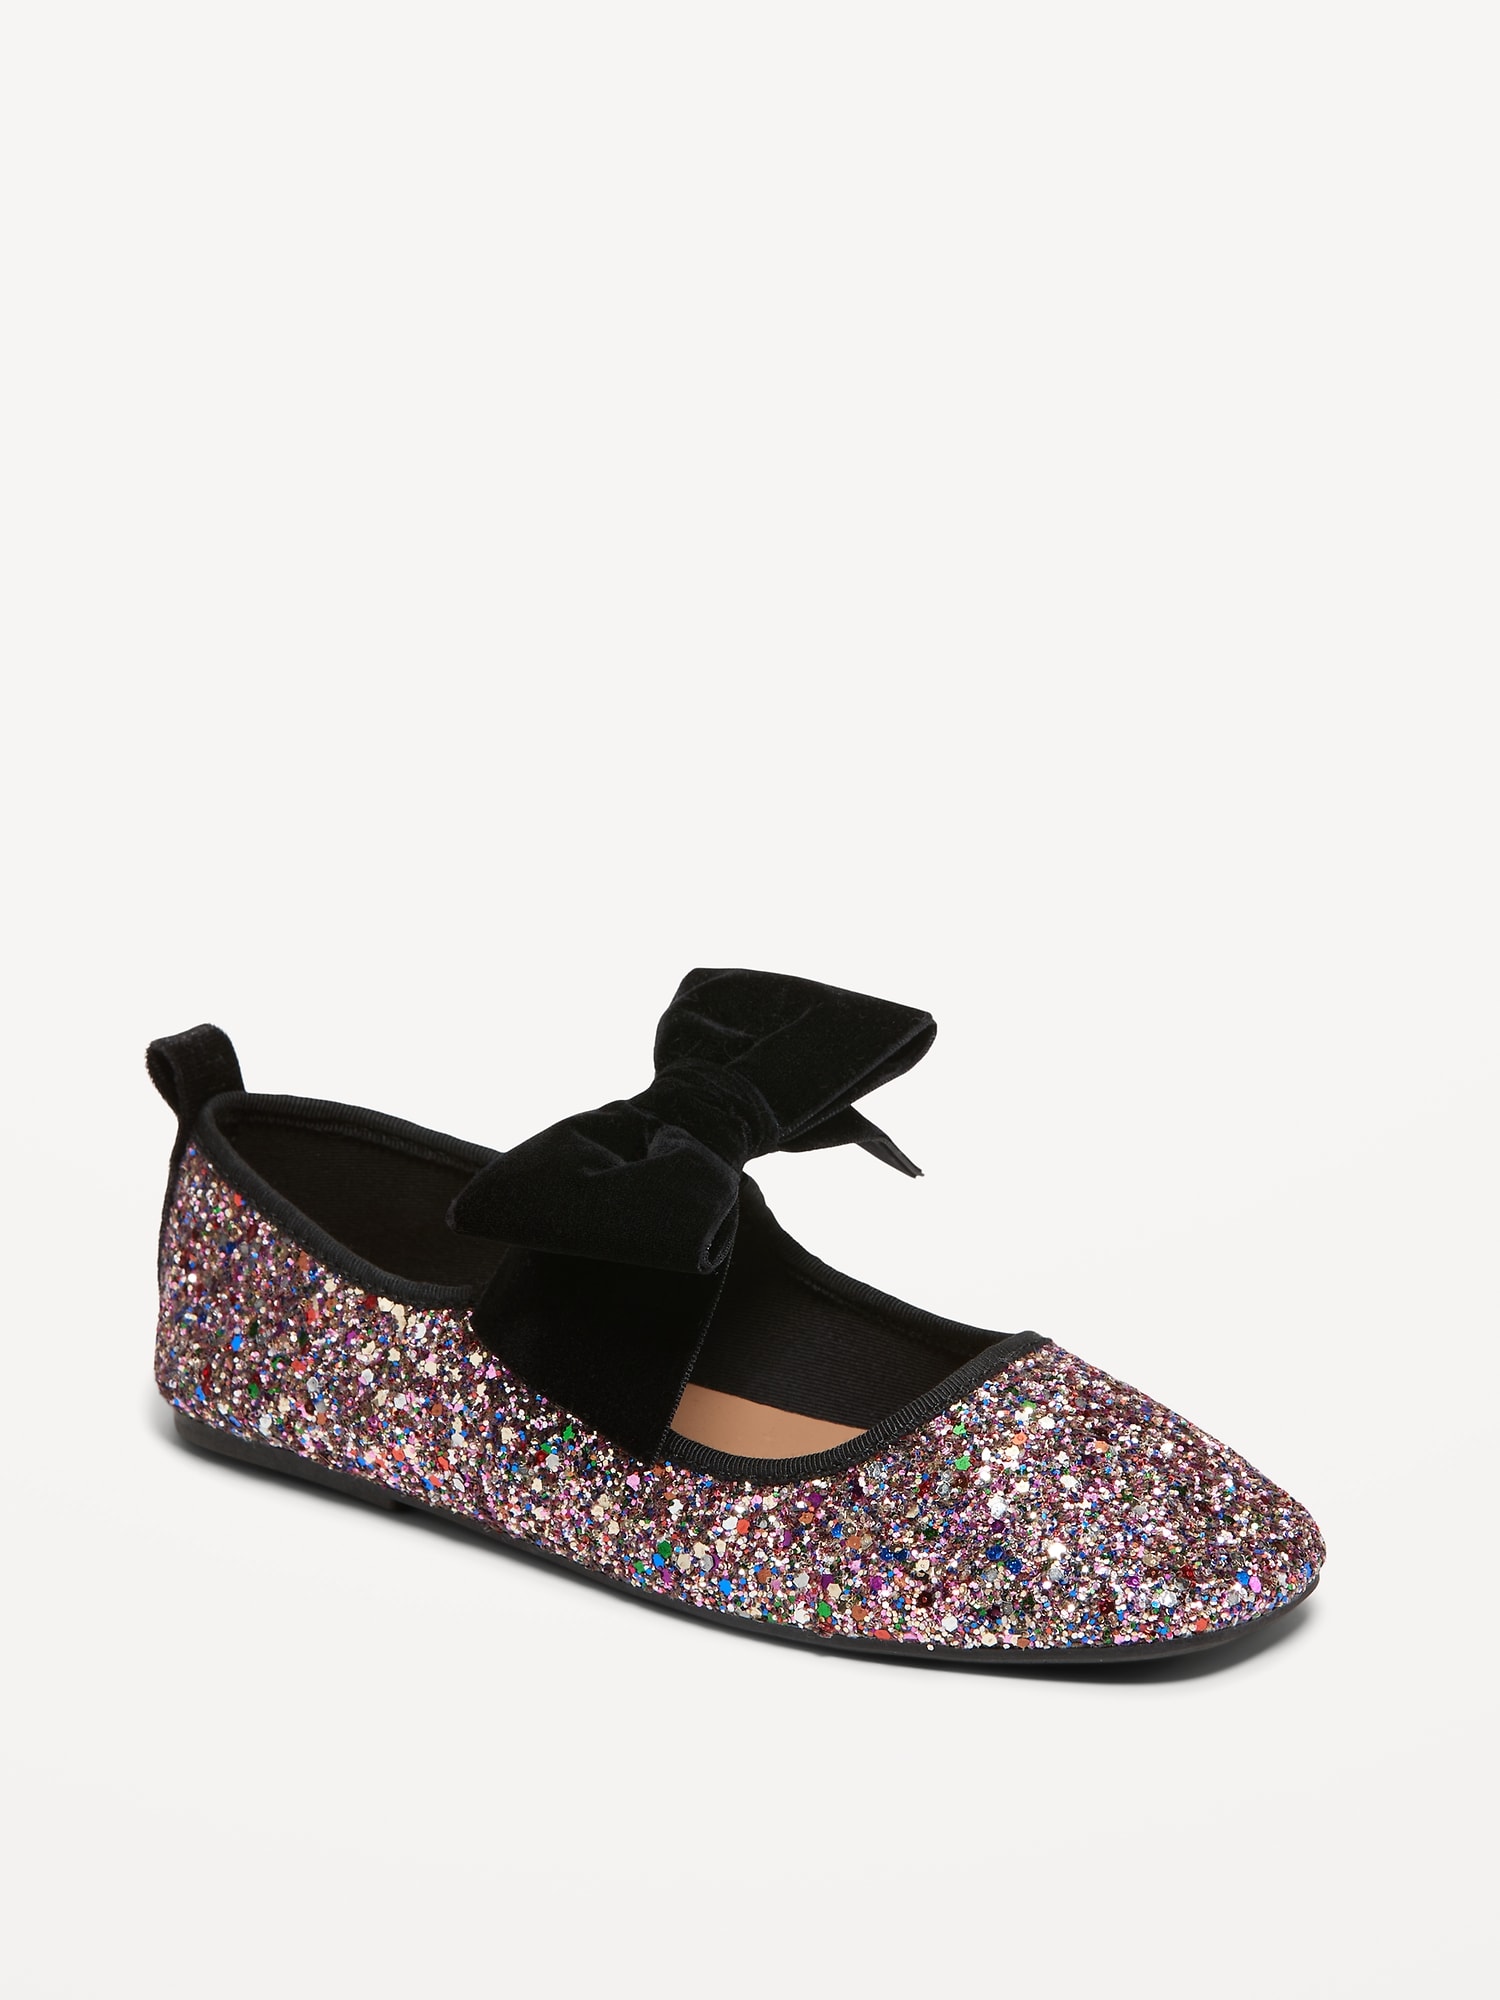 Faux-Suede Bow-Tie Ballet Flat Shoes for Girls | Old Navy